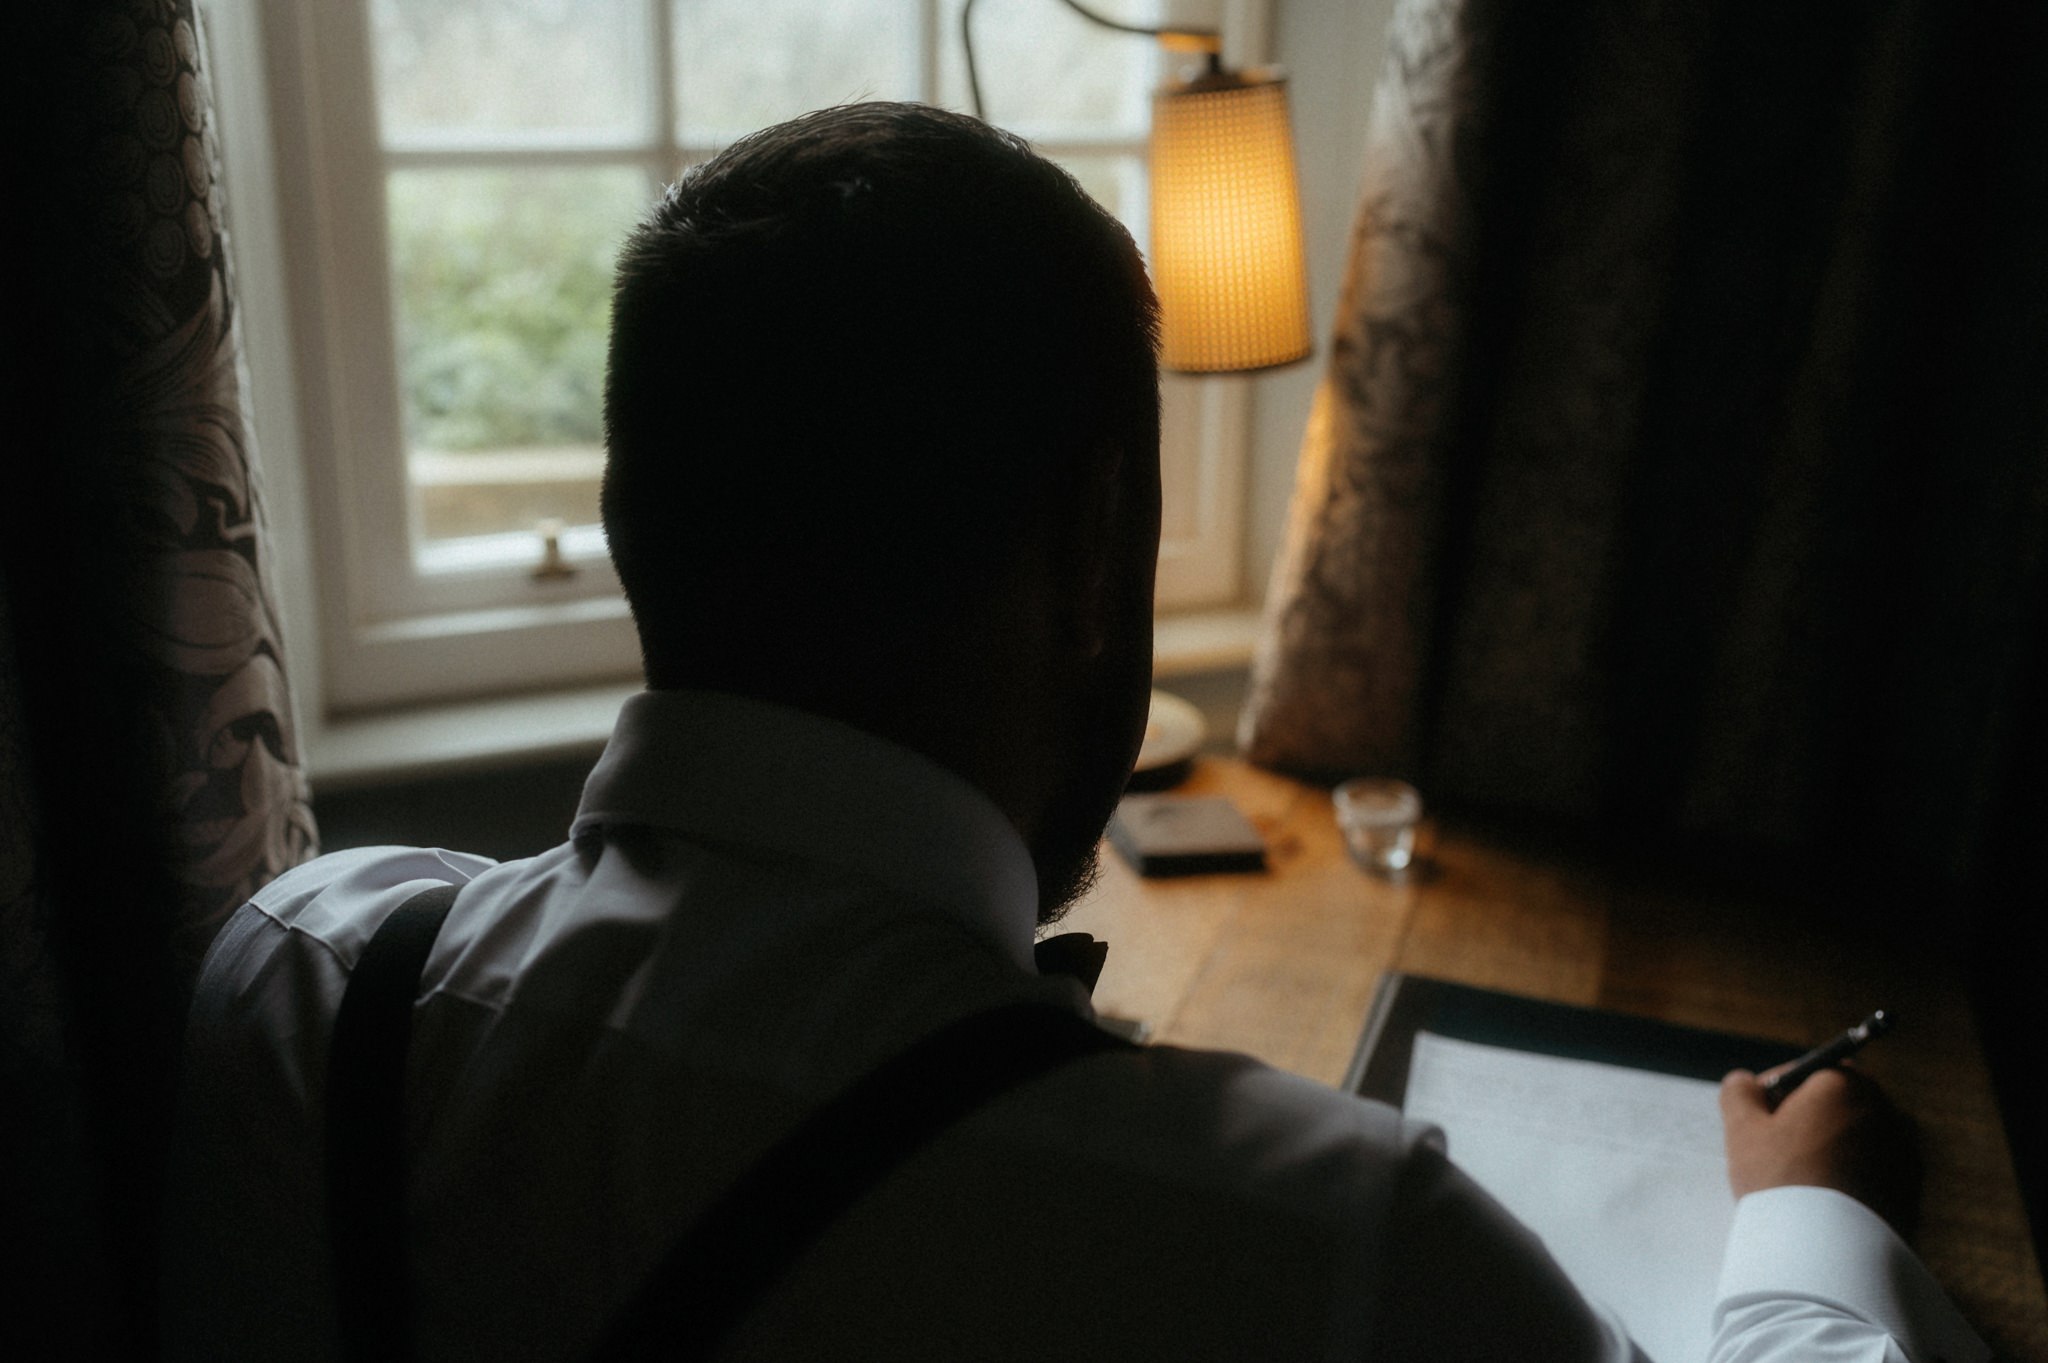 elopement in scotland. Groom writing vows by a window. photo by sean bell